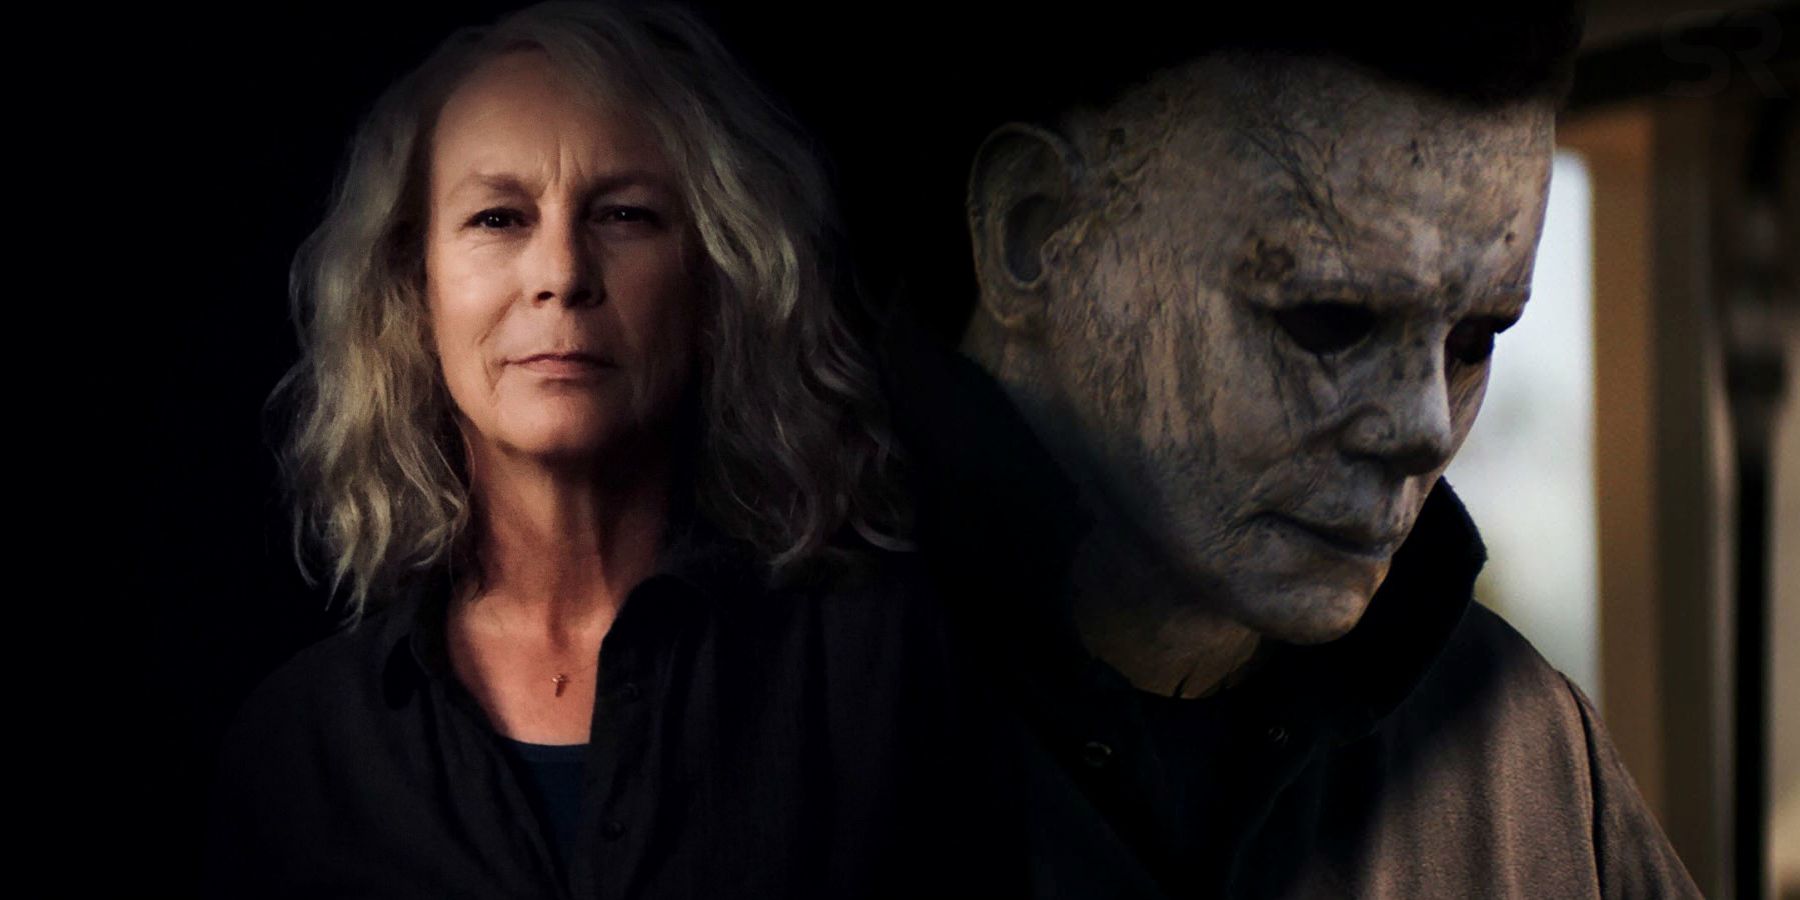 Blended image showing Laurie and Michael Myers in Halloween 2018.